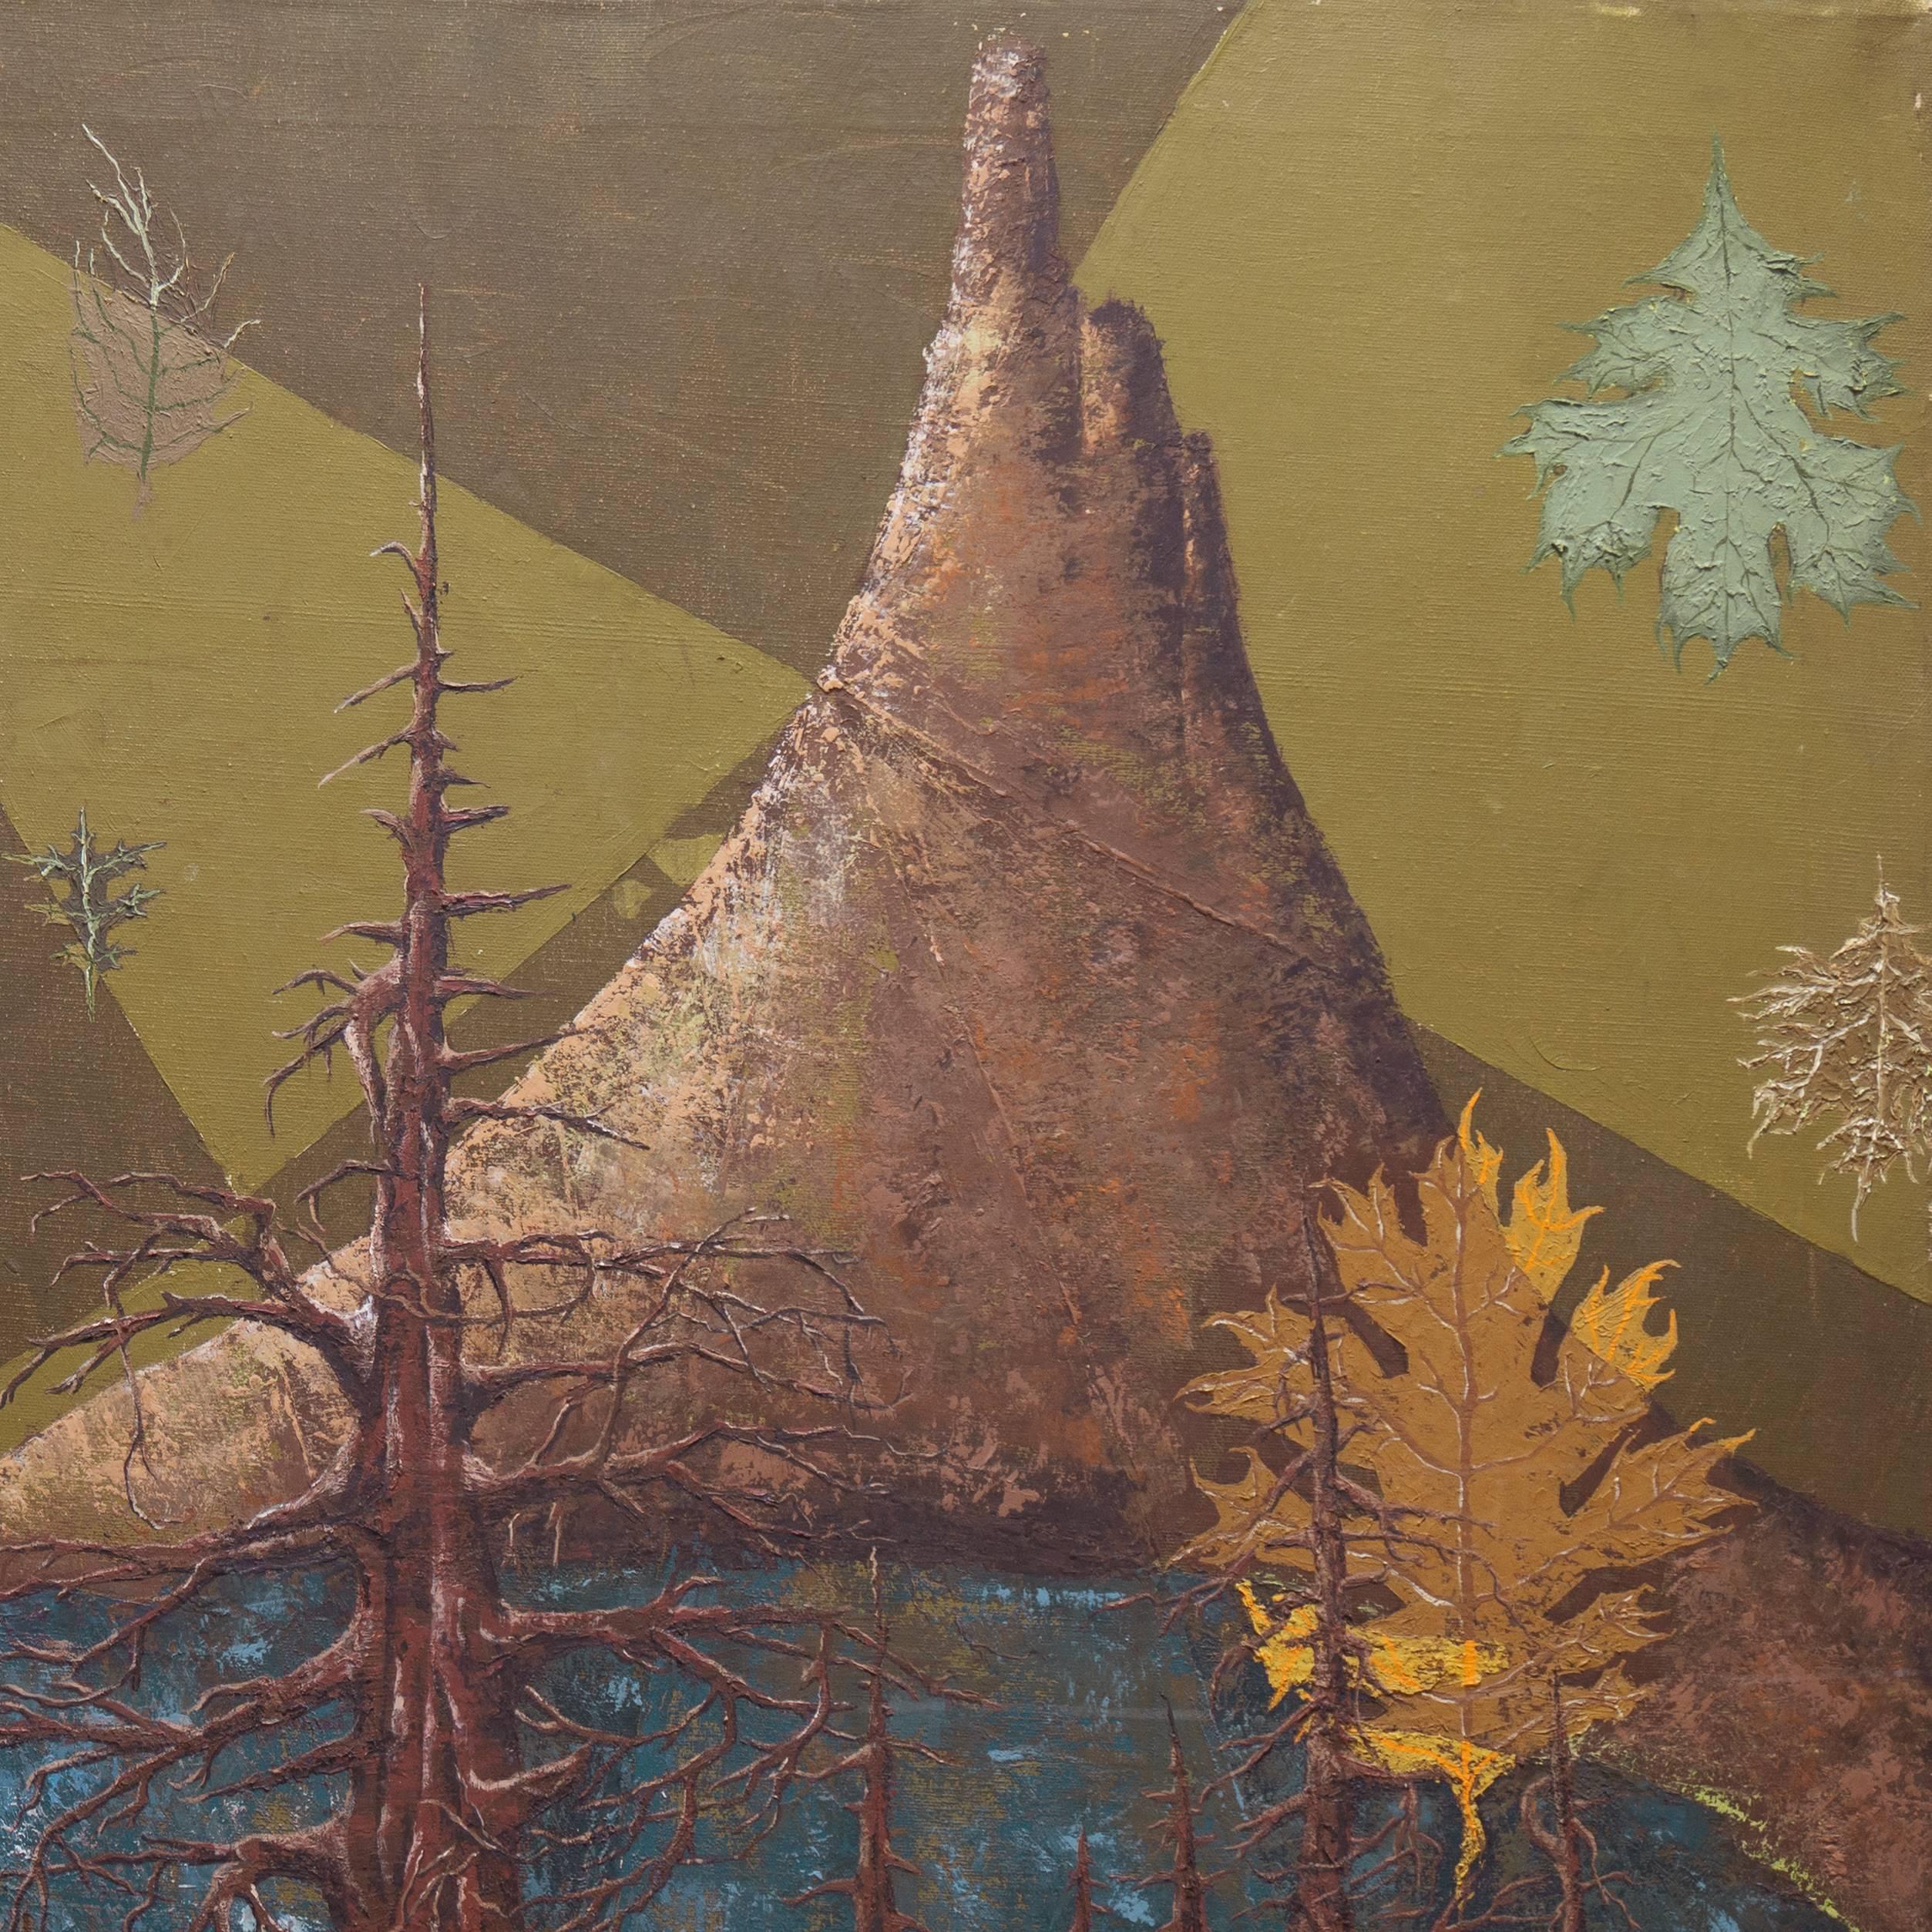 Surreal Mountain Lake Landscape, Falling Autumn Leaves - Painting by O. Connor